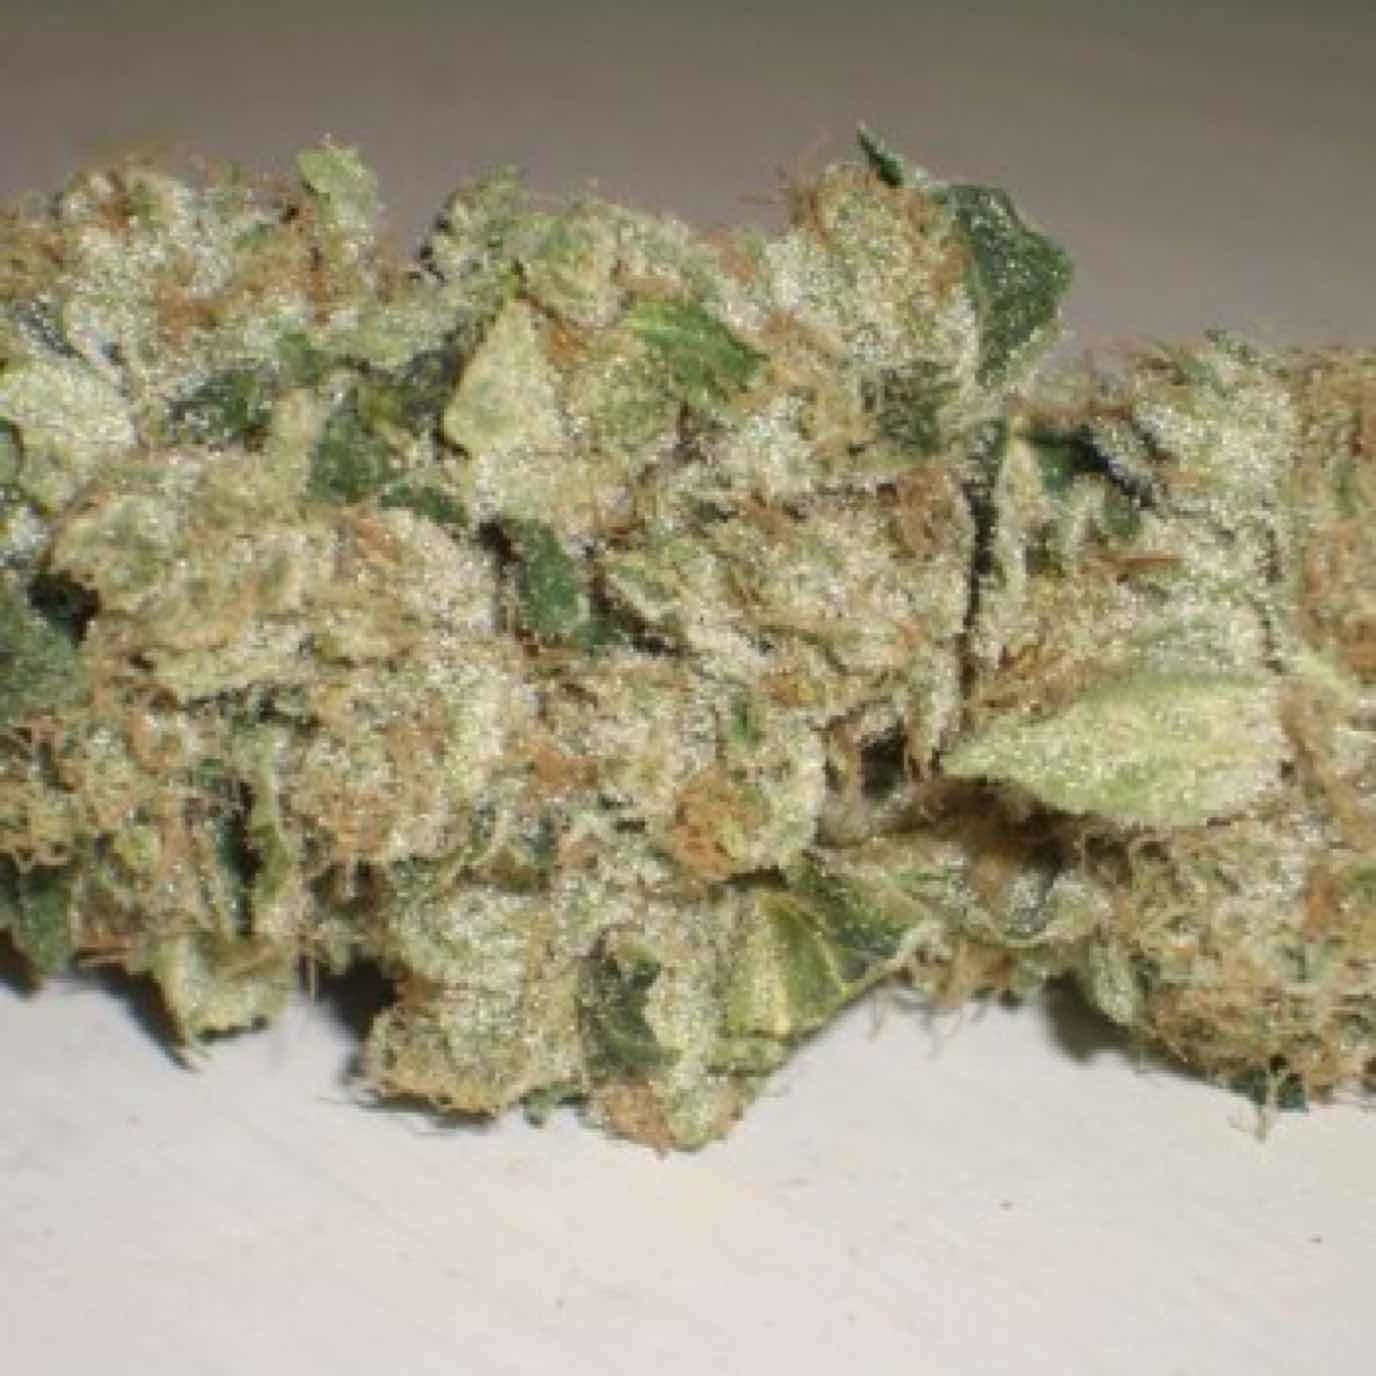 indica-appalachia-og-donate-one-18-2c-get-one-18-free